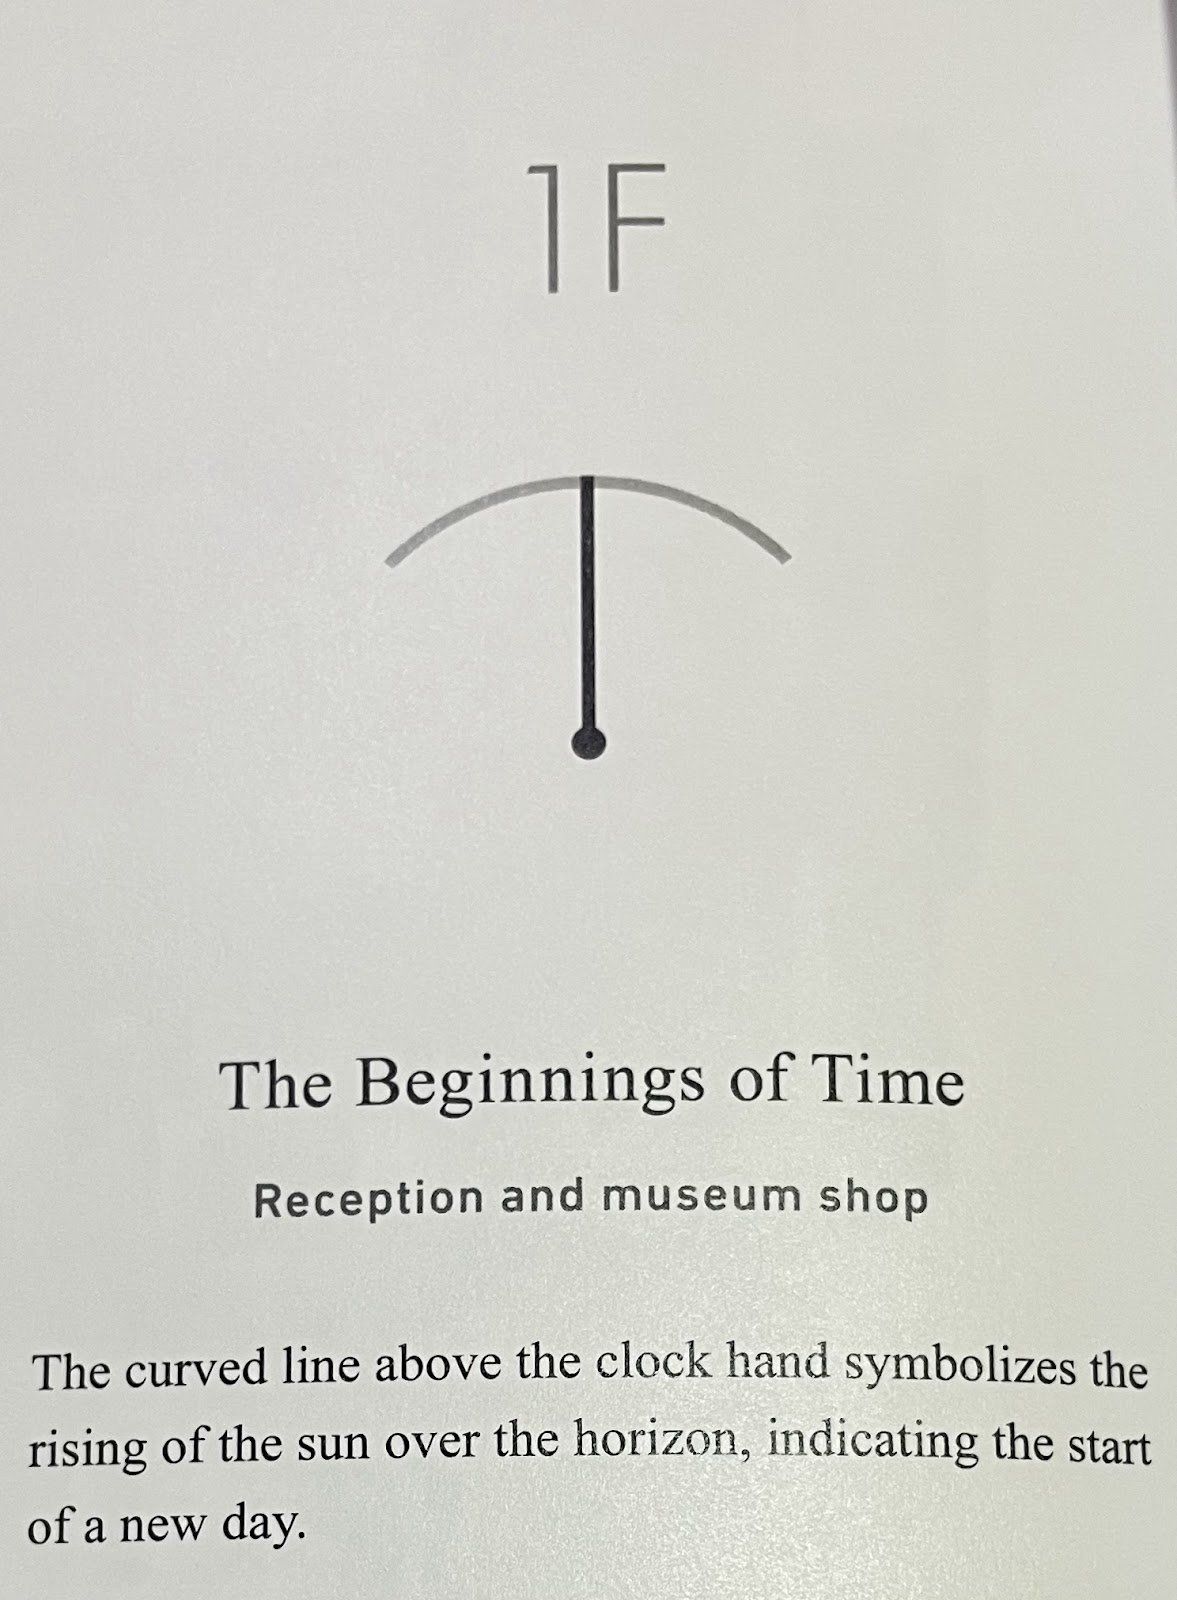 The beginnings of time